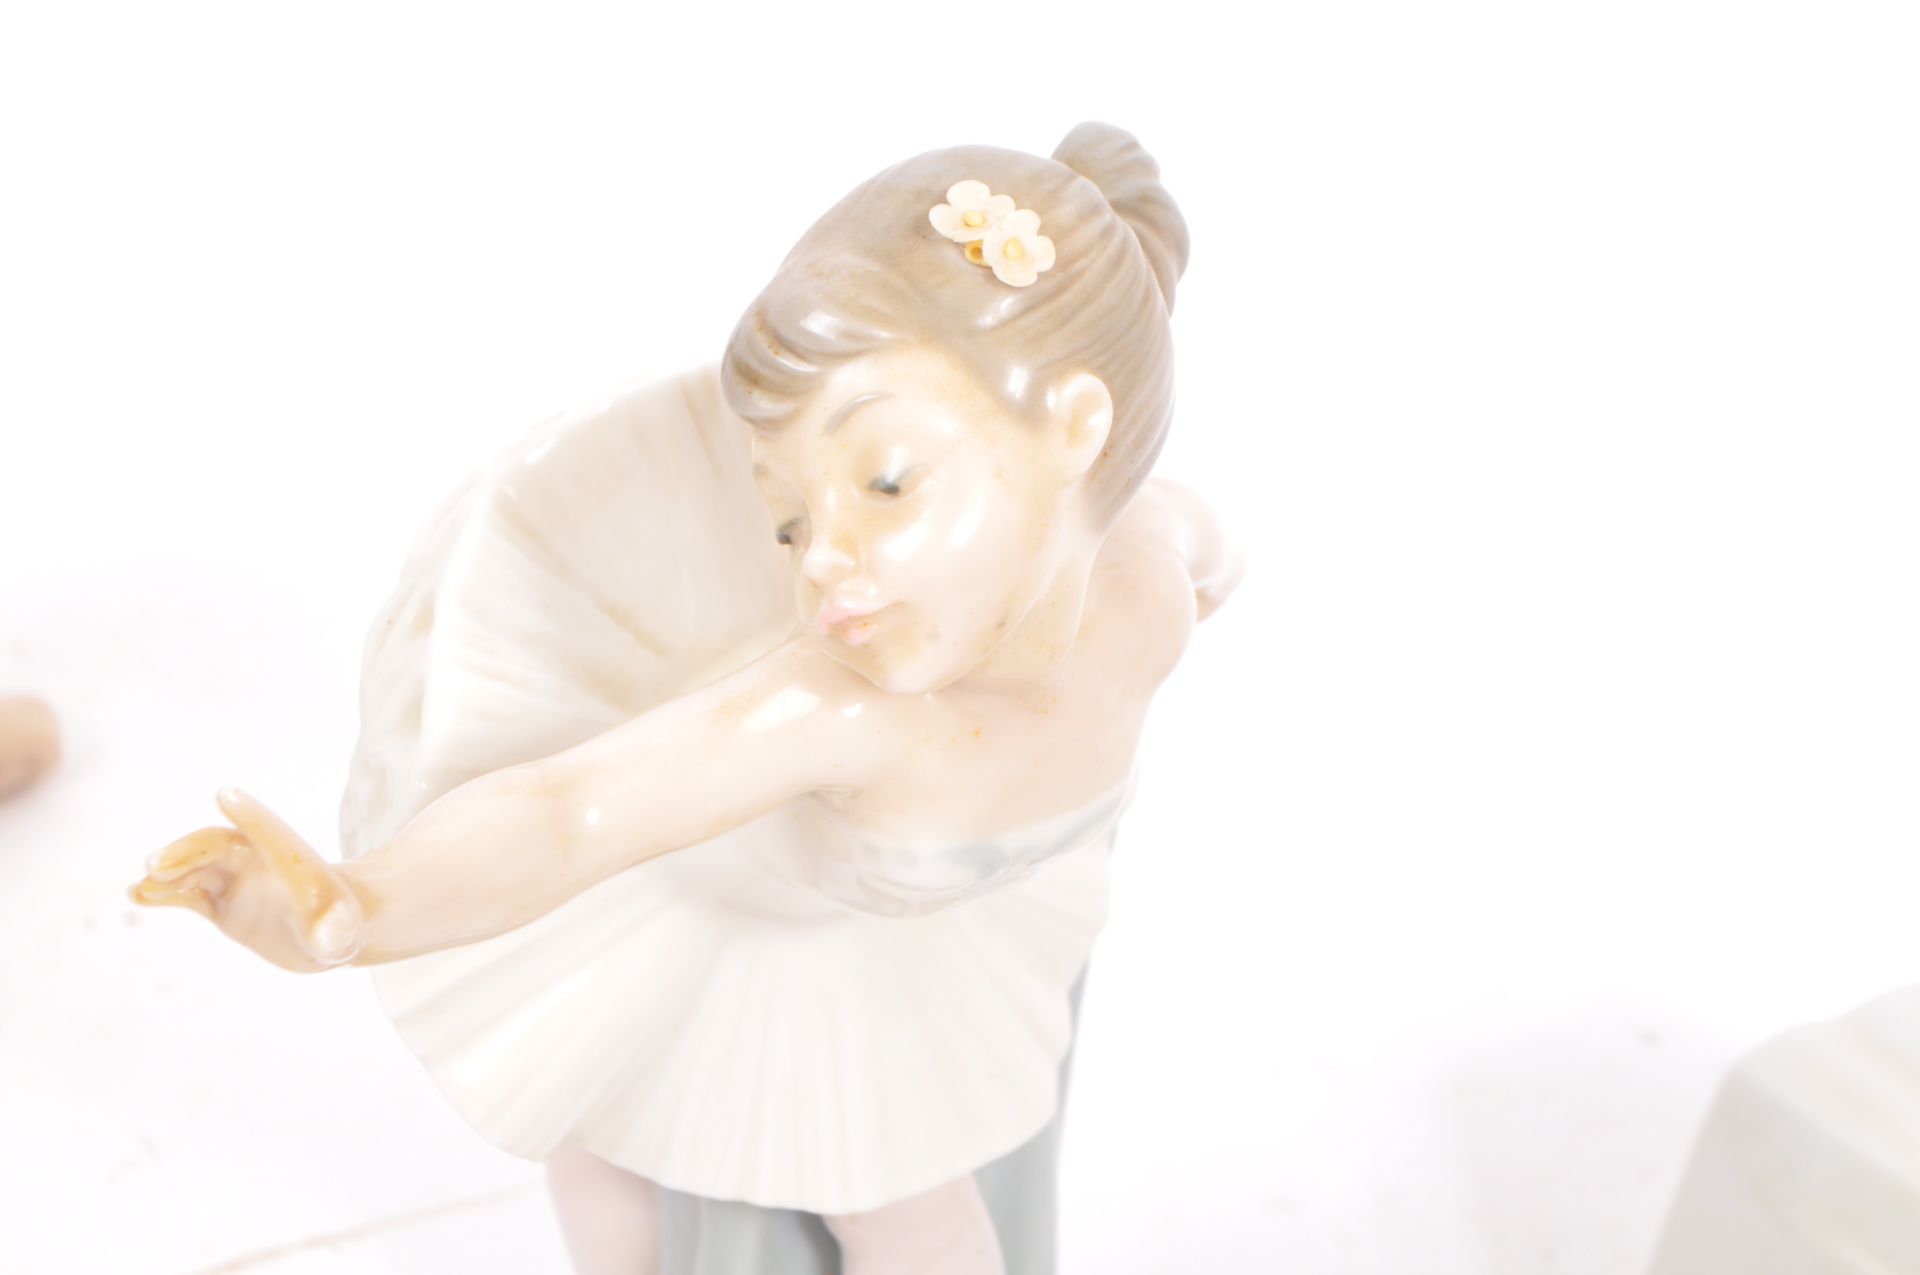 COLLECTION OF NAO PORCELAIN BALLERINA FIGURINES - Image 5 of 8